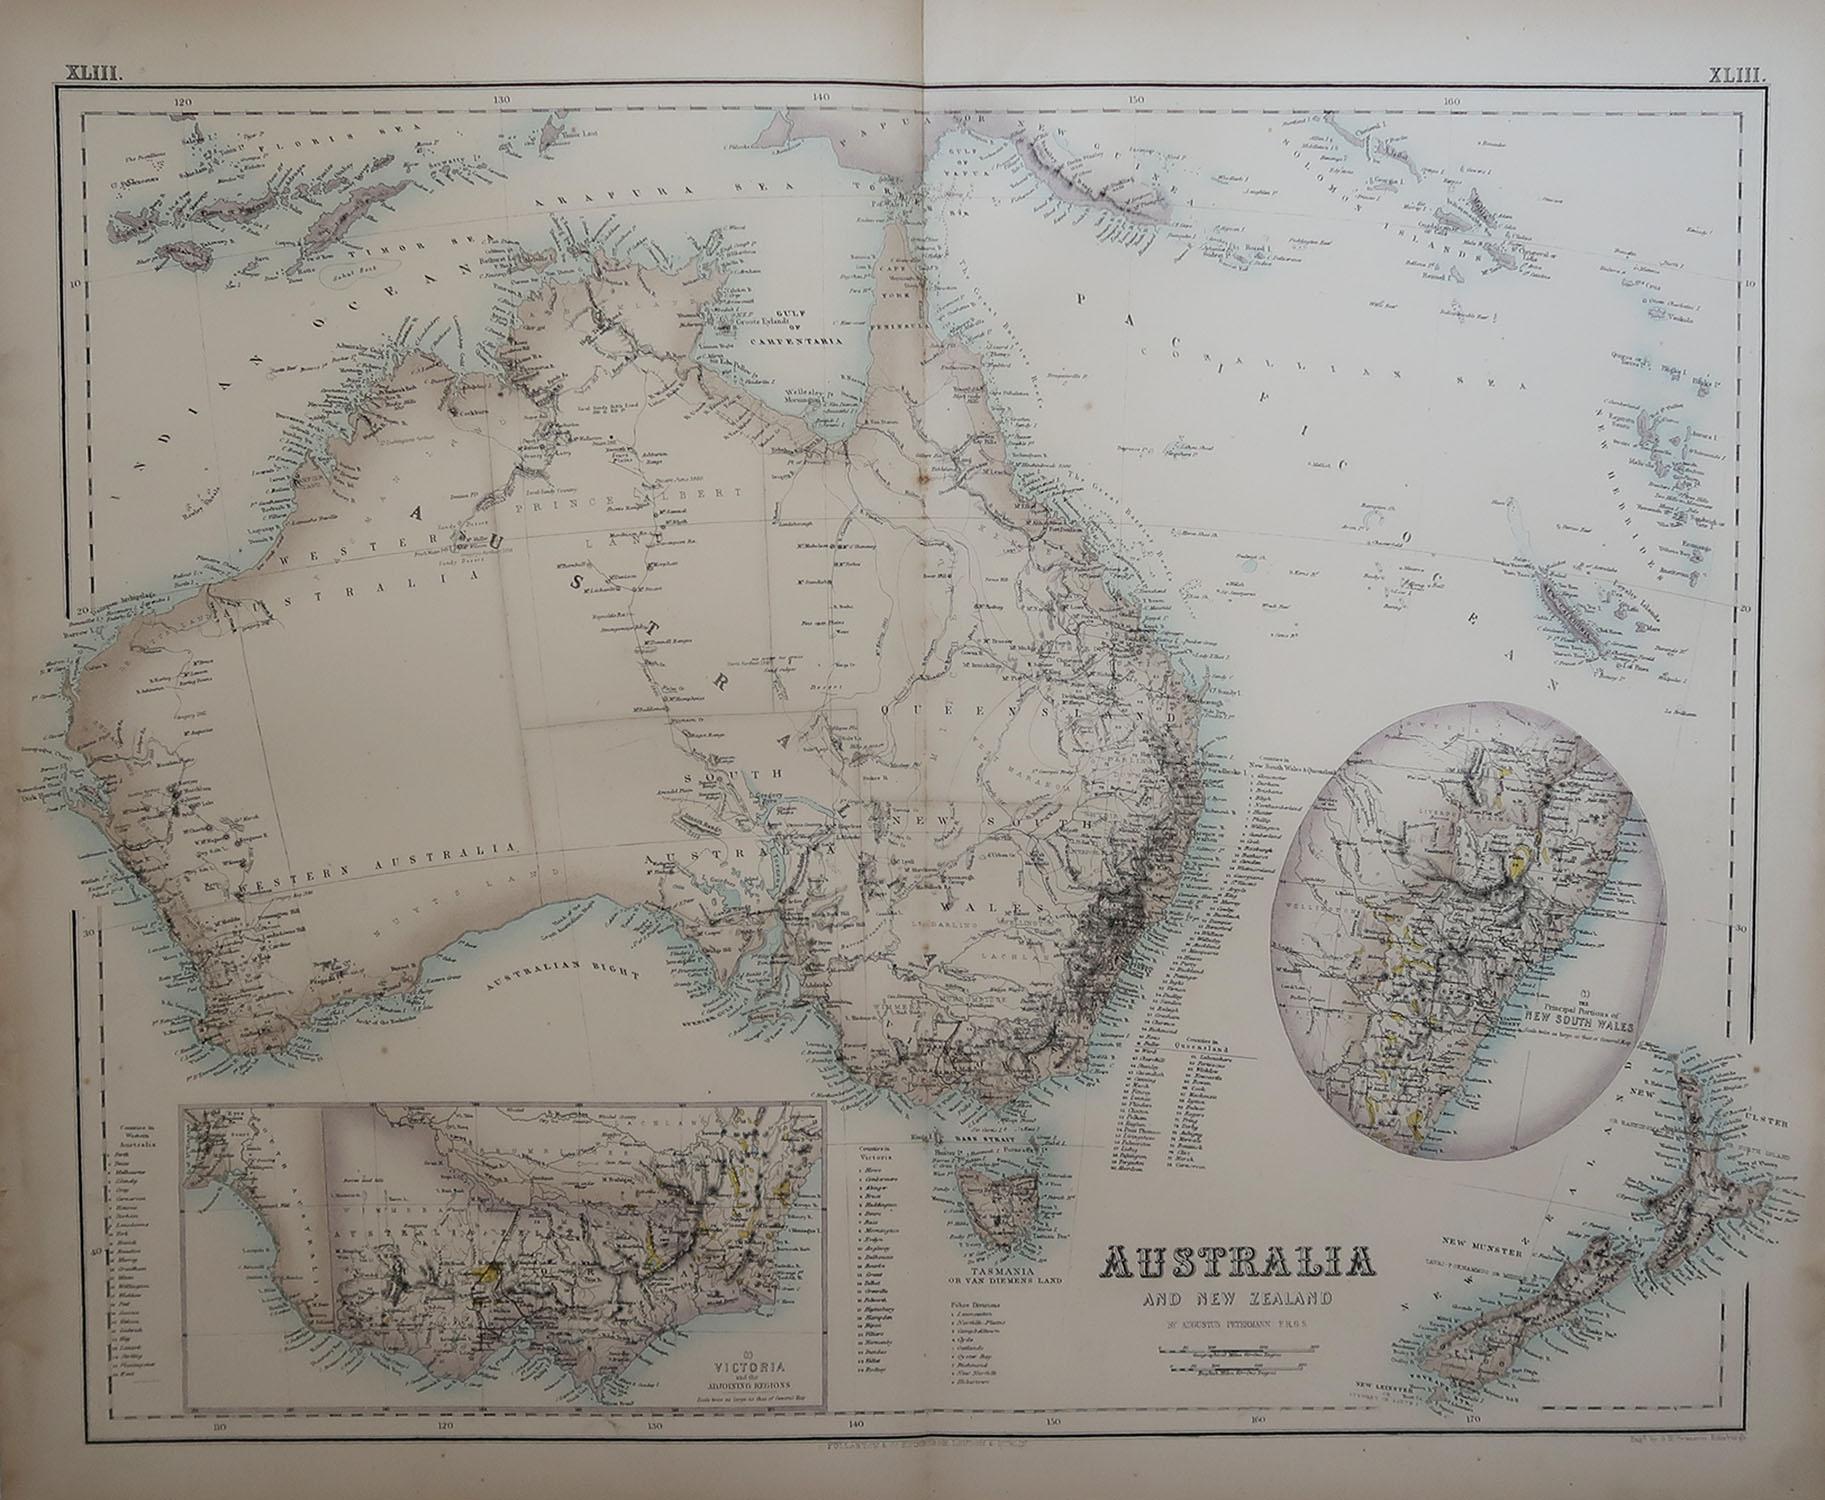 Great map of Australia

From the celebrated Royal Illustrated Atlas

Engraved by Swanston after the drawing by Augustus Petermann

Lithograph. Original color. 

Published by Fullarton, Edinburgh. C.1870

Unframed.












 